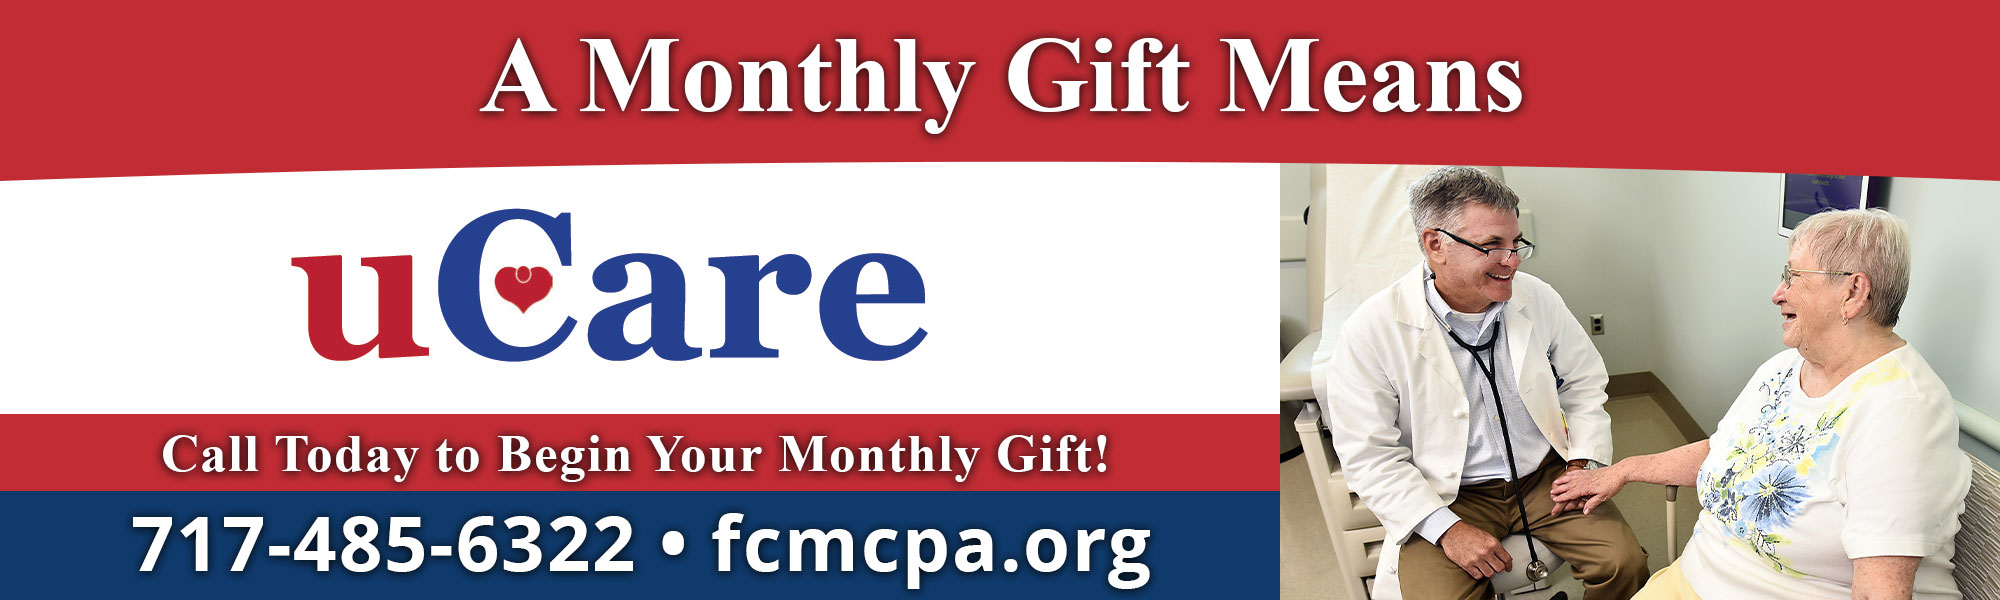 A Monthly Gift Means uCare
Call Today to Begin Your Monthly Gift!
717-485-6322 • fcmcpa.org 

Pictured is a Dr with a patient.